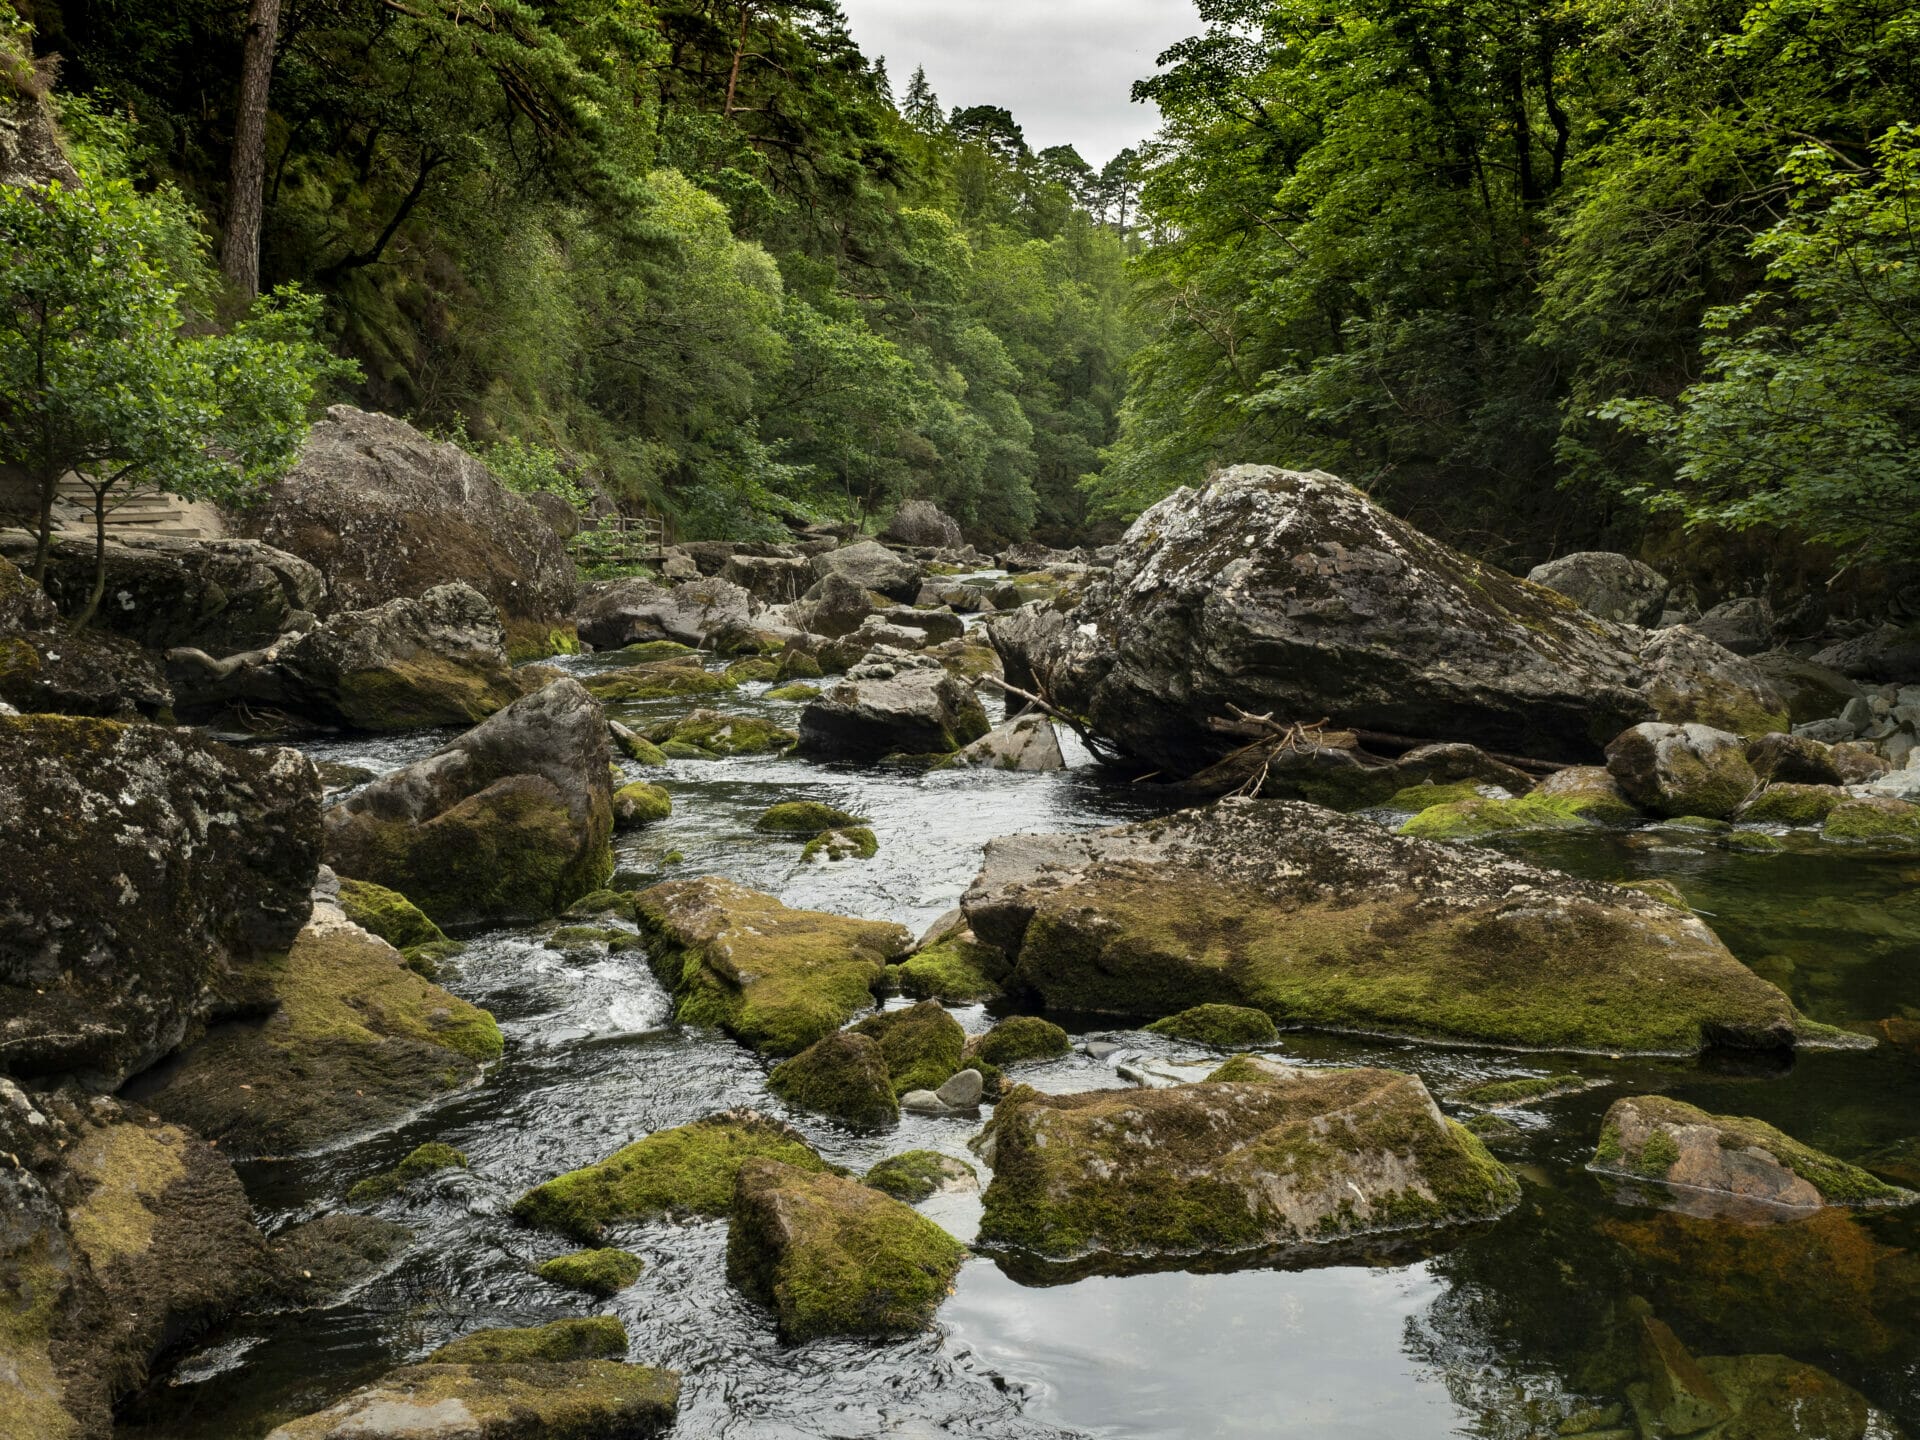 Photo of Green Trees alongside the Glaslyn river in Beddgelert, Snowdonia National Ark, North Wales. Taken by Eifion Williams on a Waling With Helen Iles Photo Walk for Welshot Imaging Photographic Academy